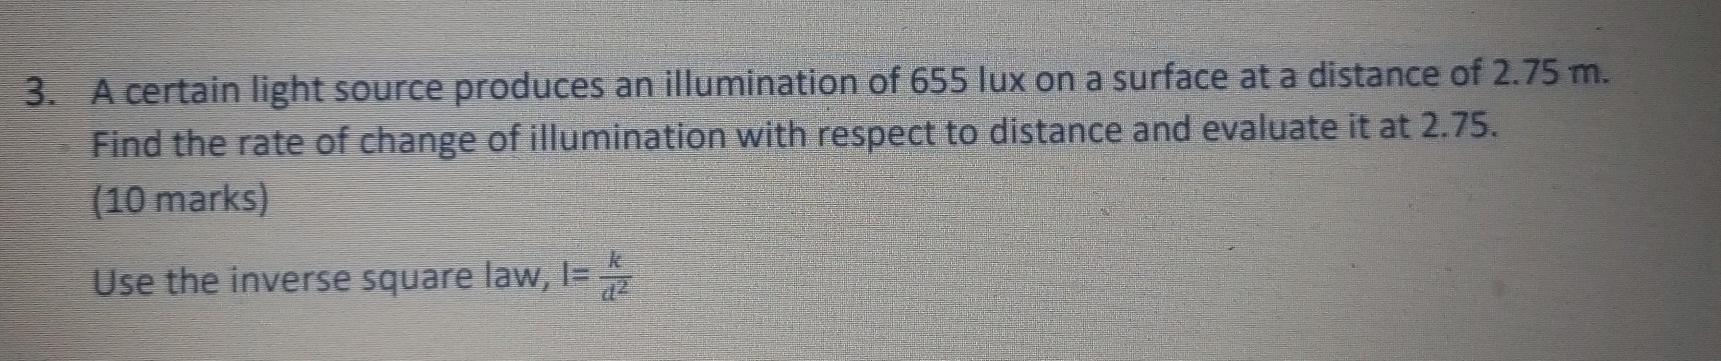 3. A certain light source produces an illumination of 655 lux on a surface at a distance of 2.75 m. Find the rate of change o